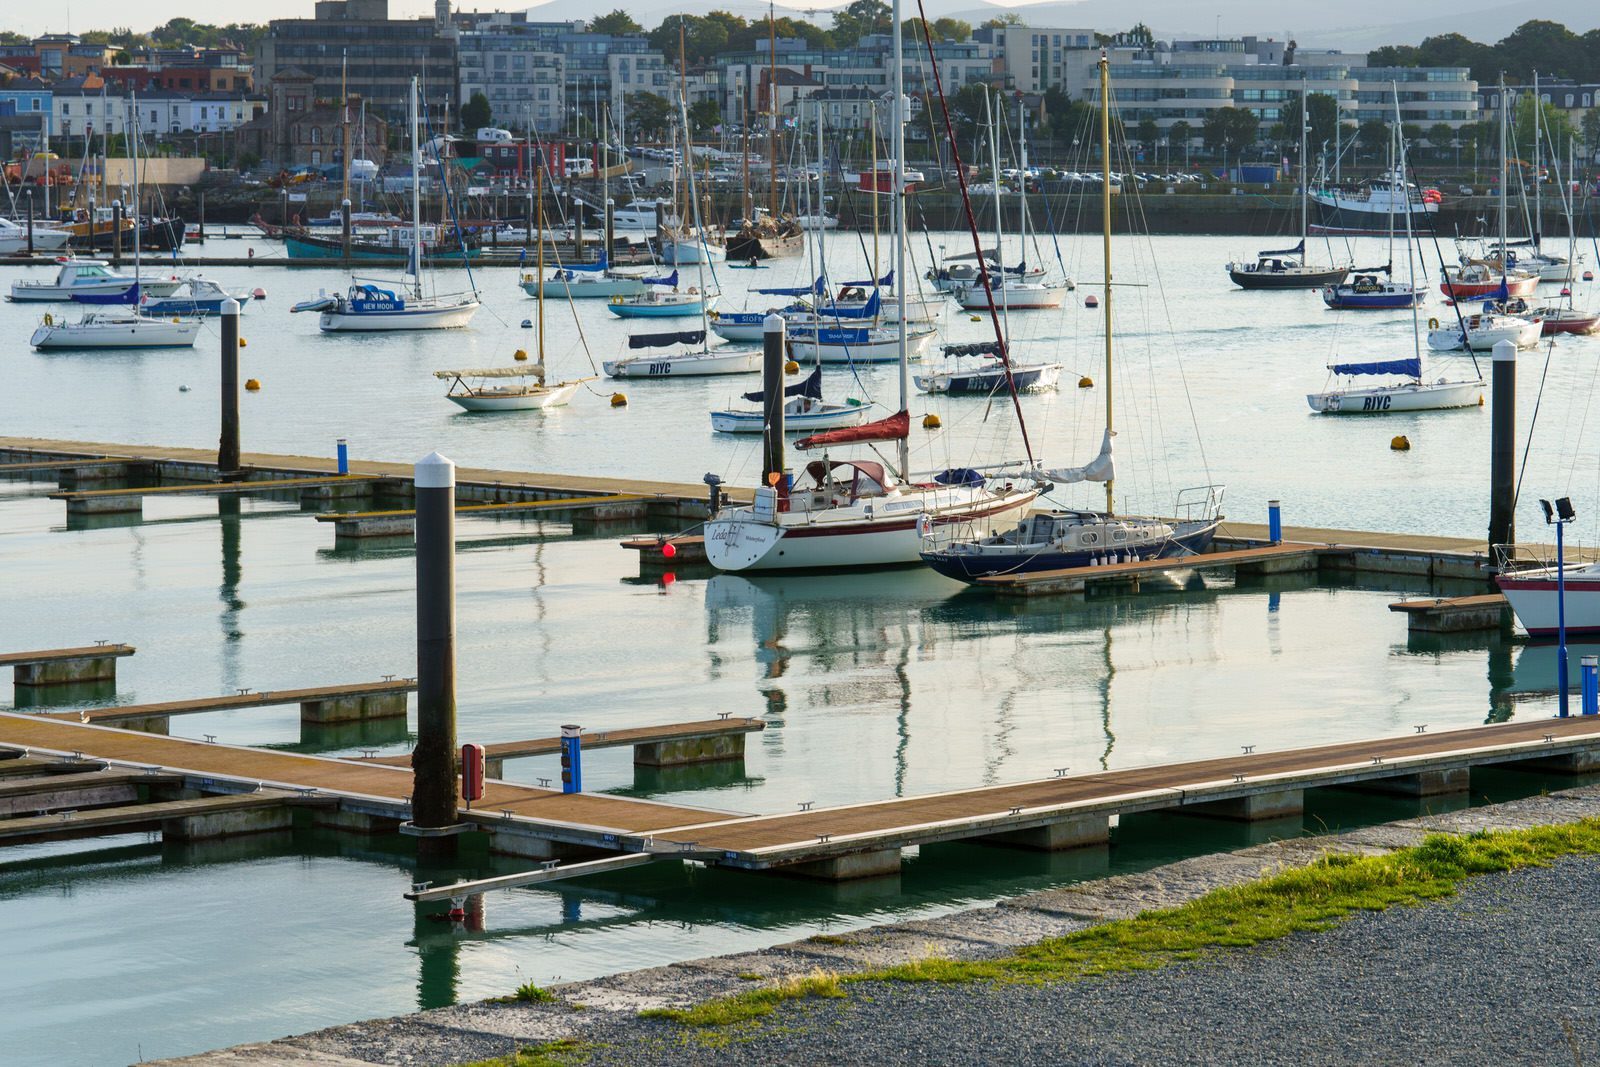 THE SECTION OF THE MARINA NEAR THE WESTERN BREAKWATER [DUN LAOGHAIRE HARBOUR] 011